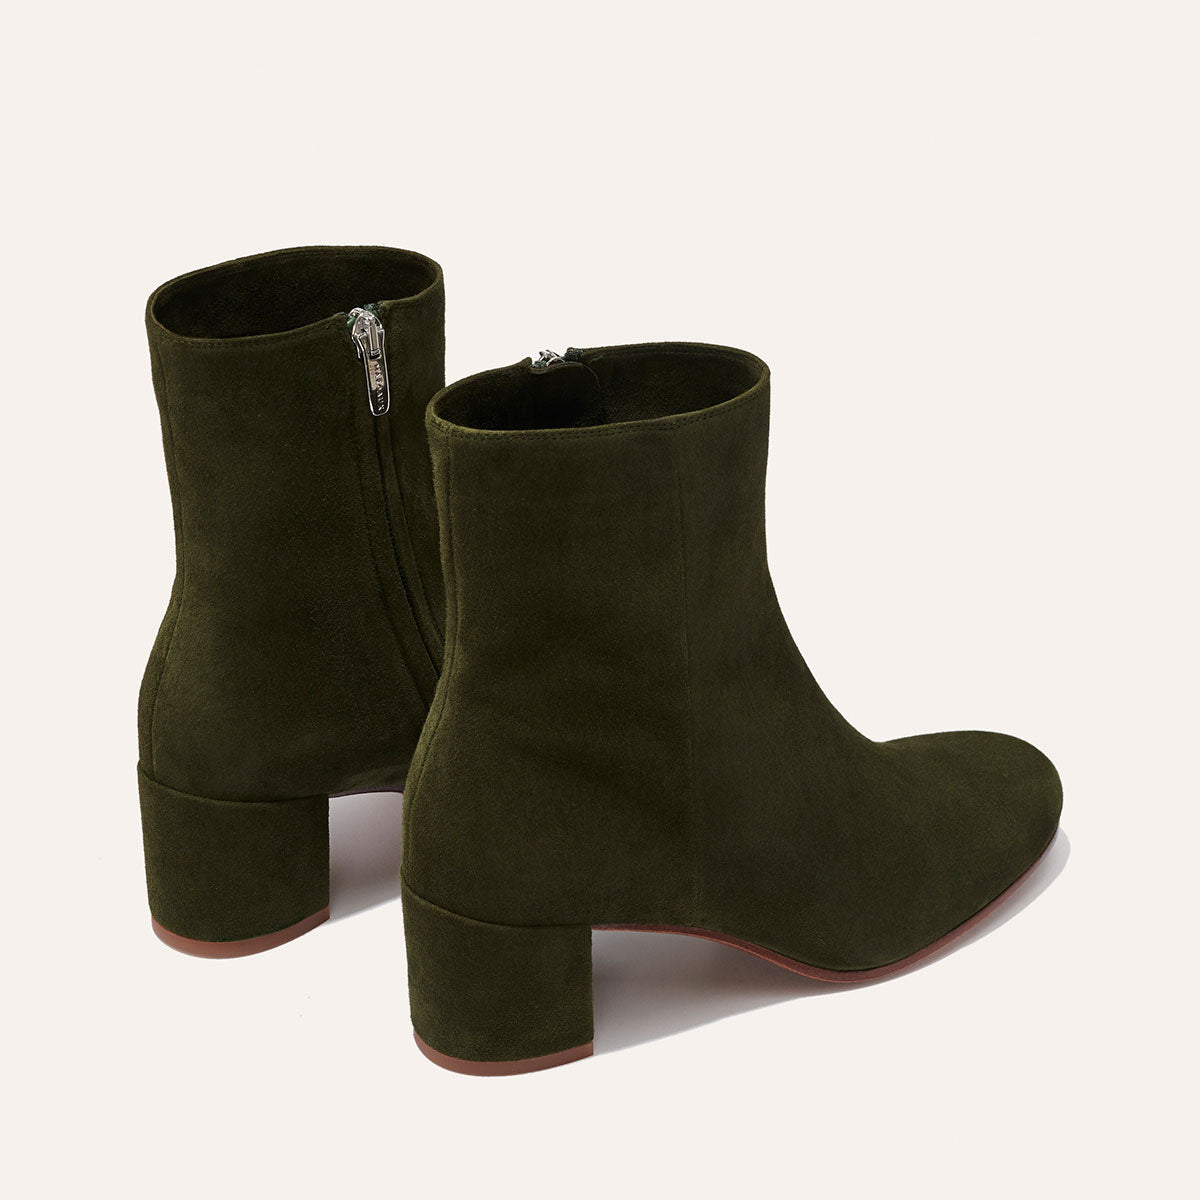 The Boot - Olive Suede